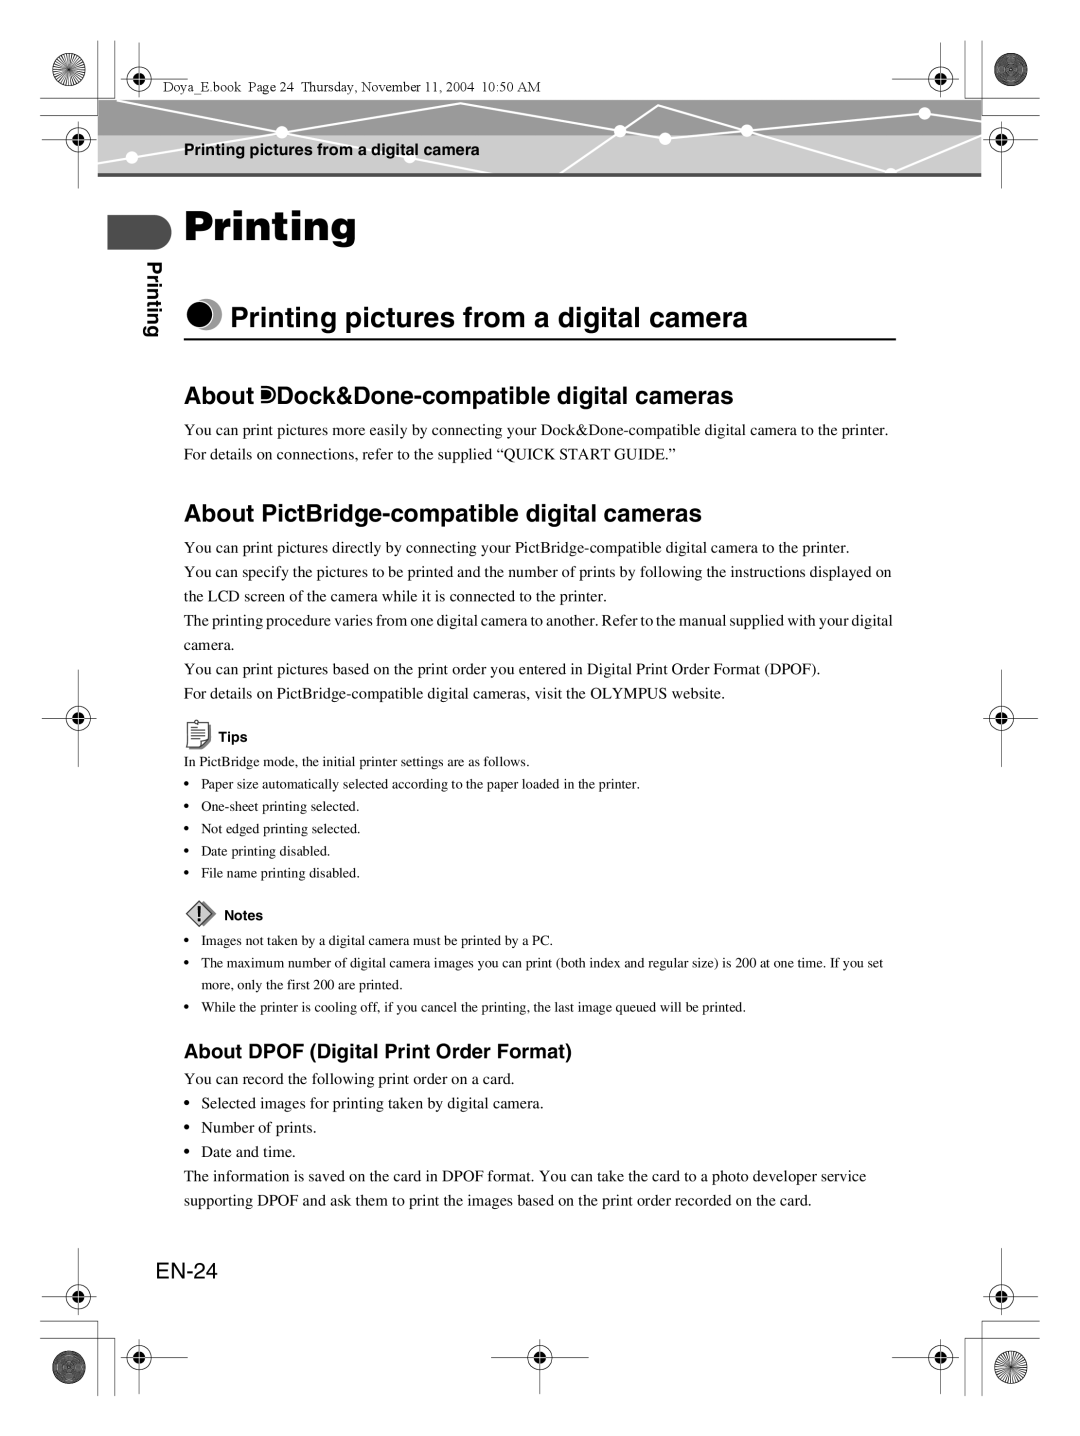 Olympus P-S100 user manual Printing pictures from a digital camera, About QDock&Done-compatible digital cameras, EN-24 